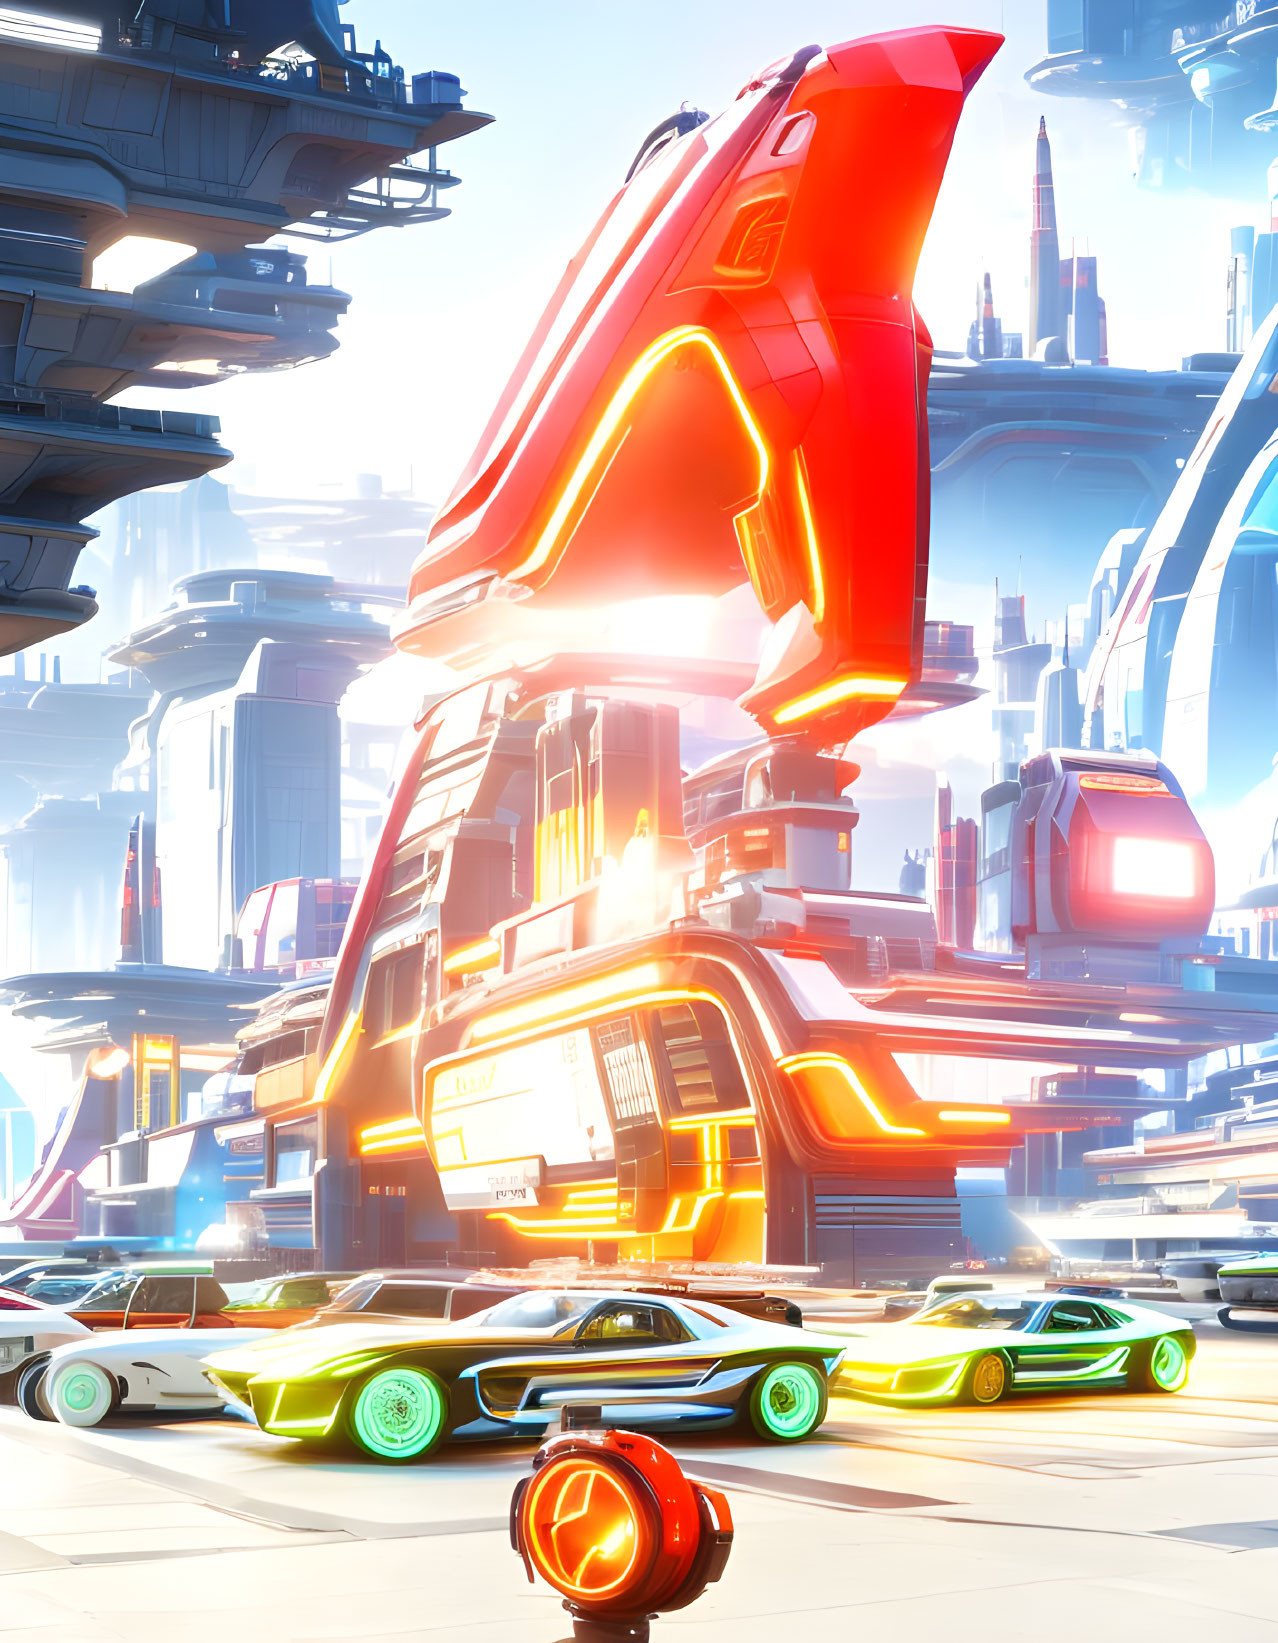 Futuristic cityscape with towering structures and flying vehicles in neon colors